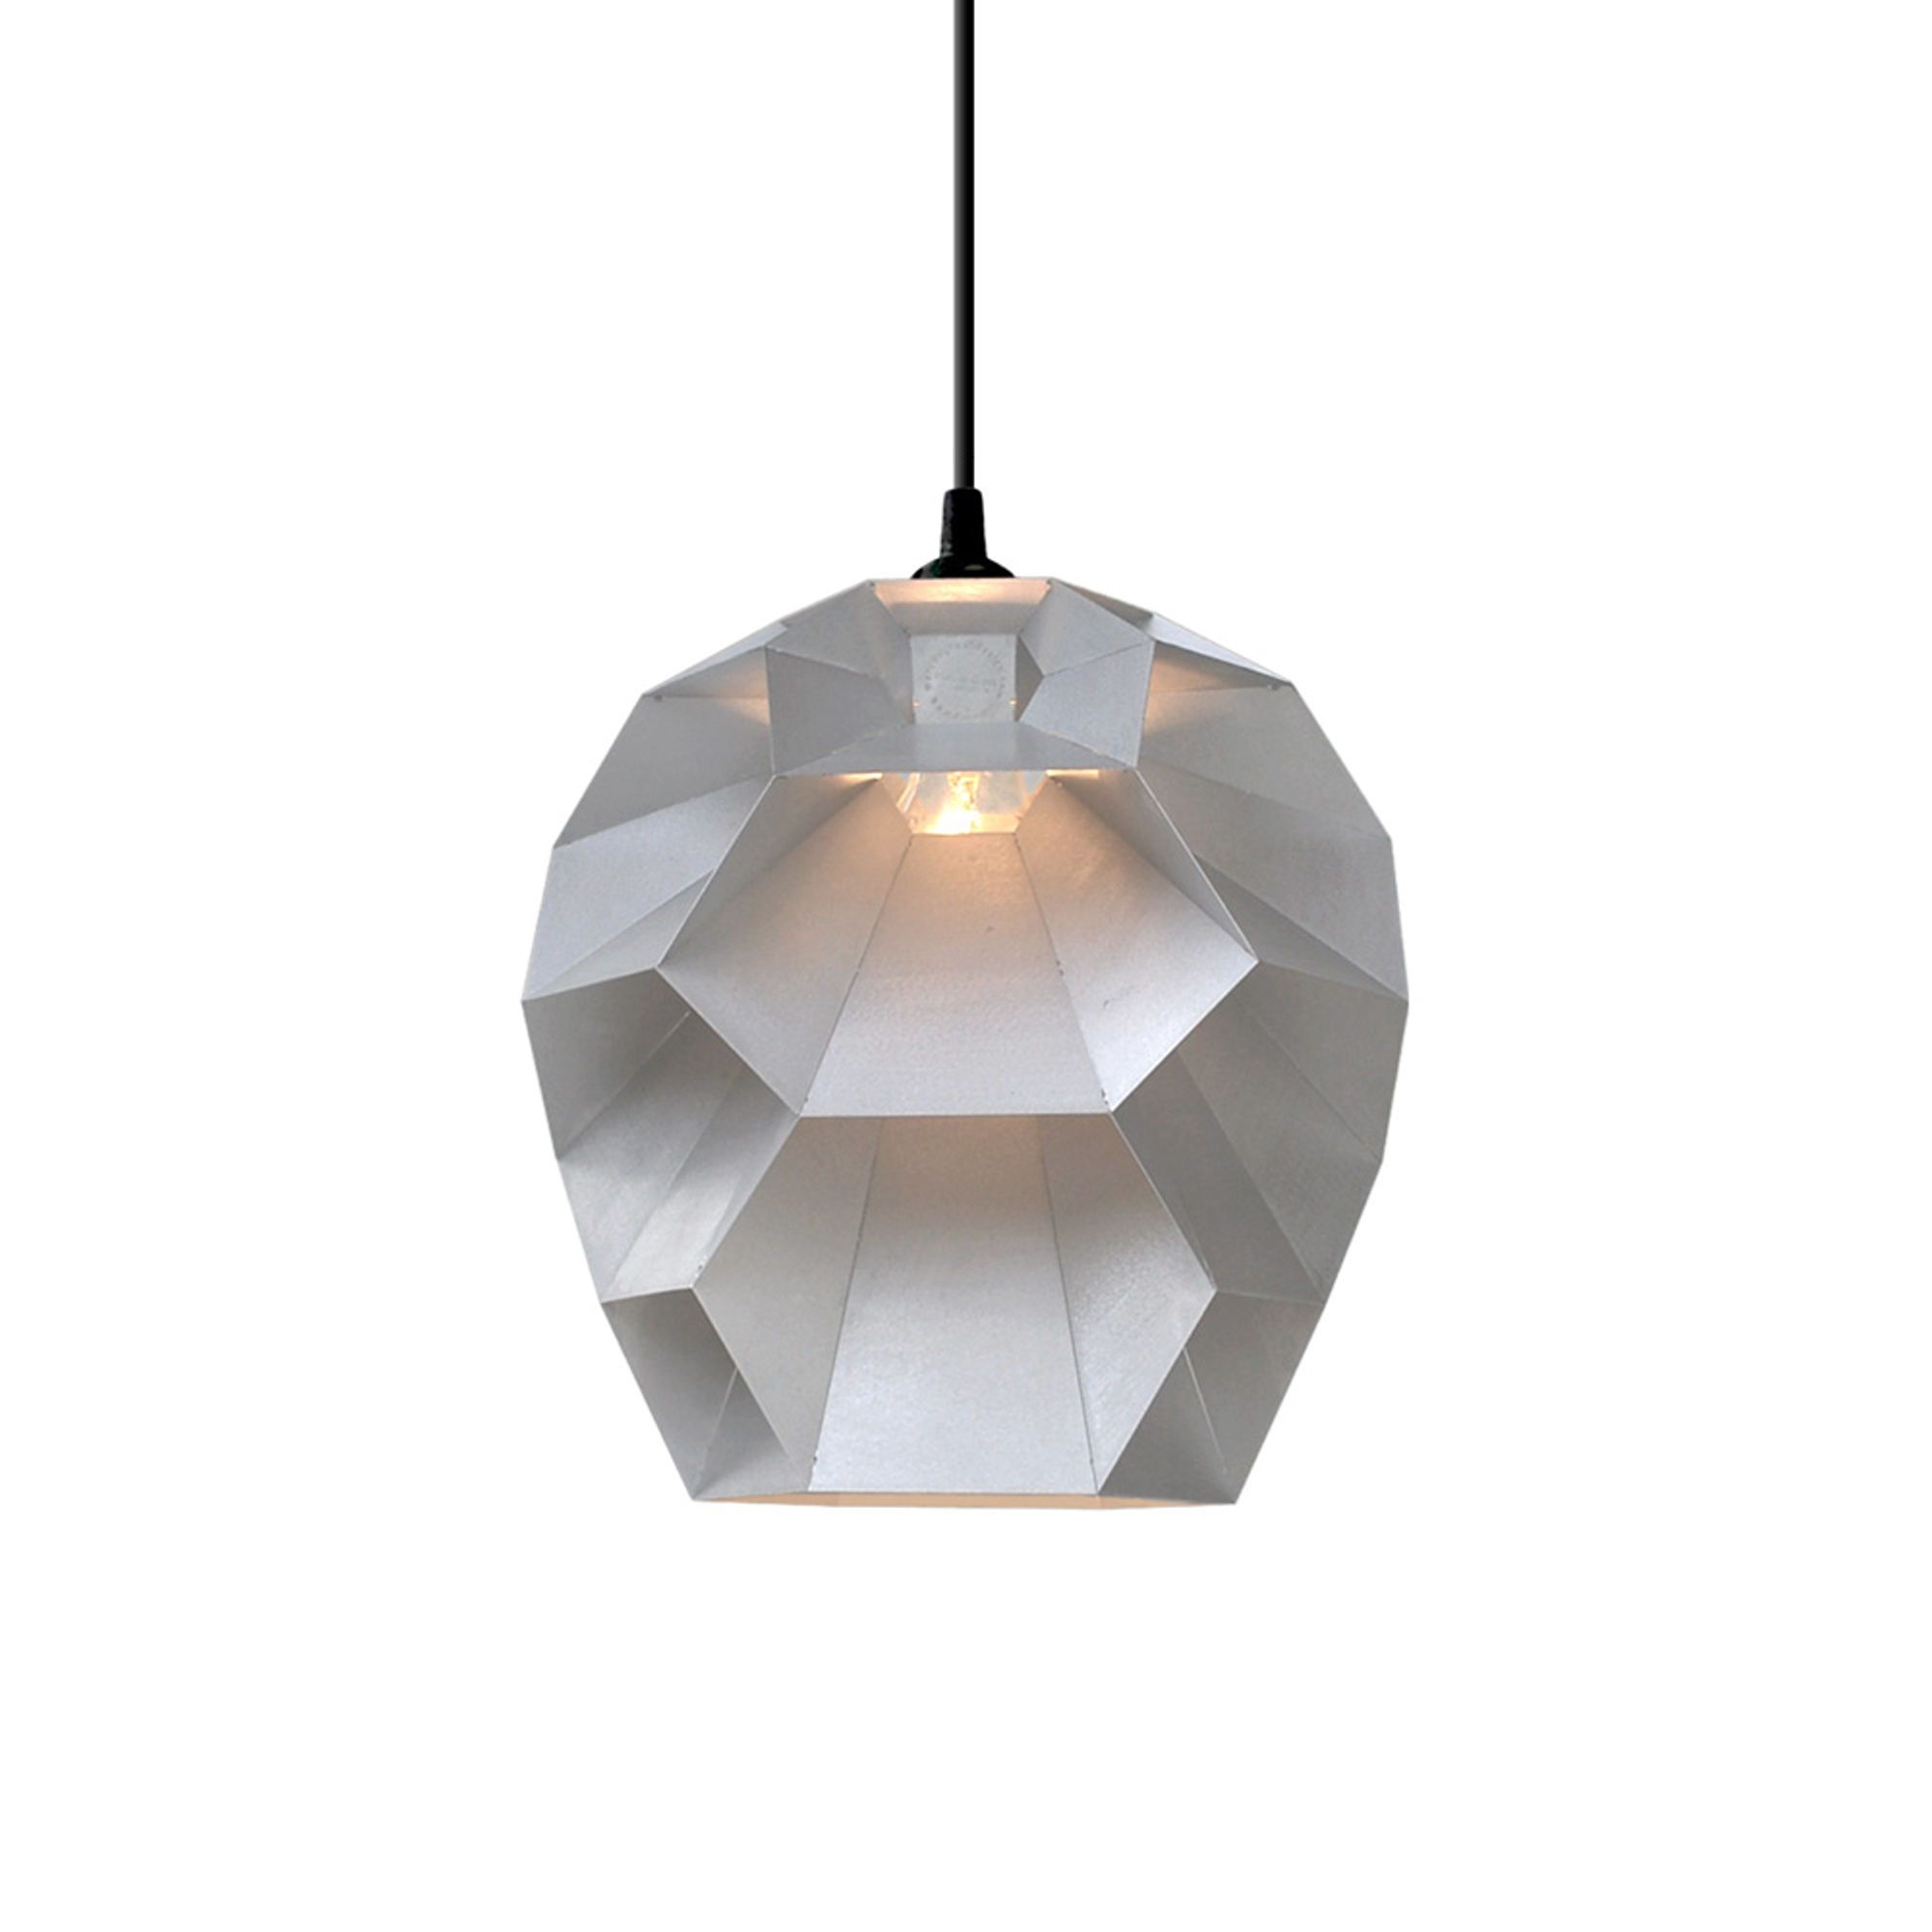 The Beehive 40 Pendant by By Marc de Groot 0